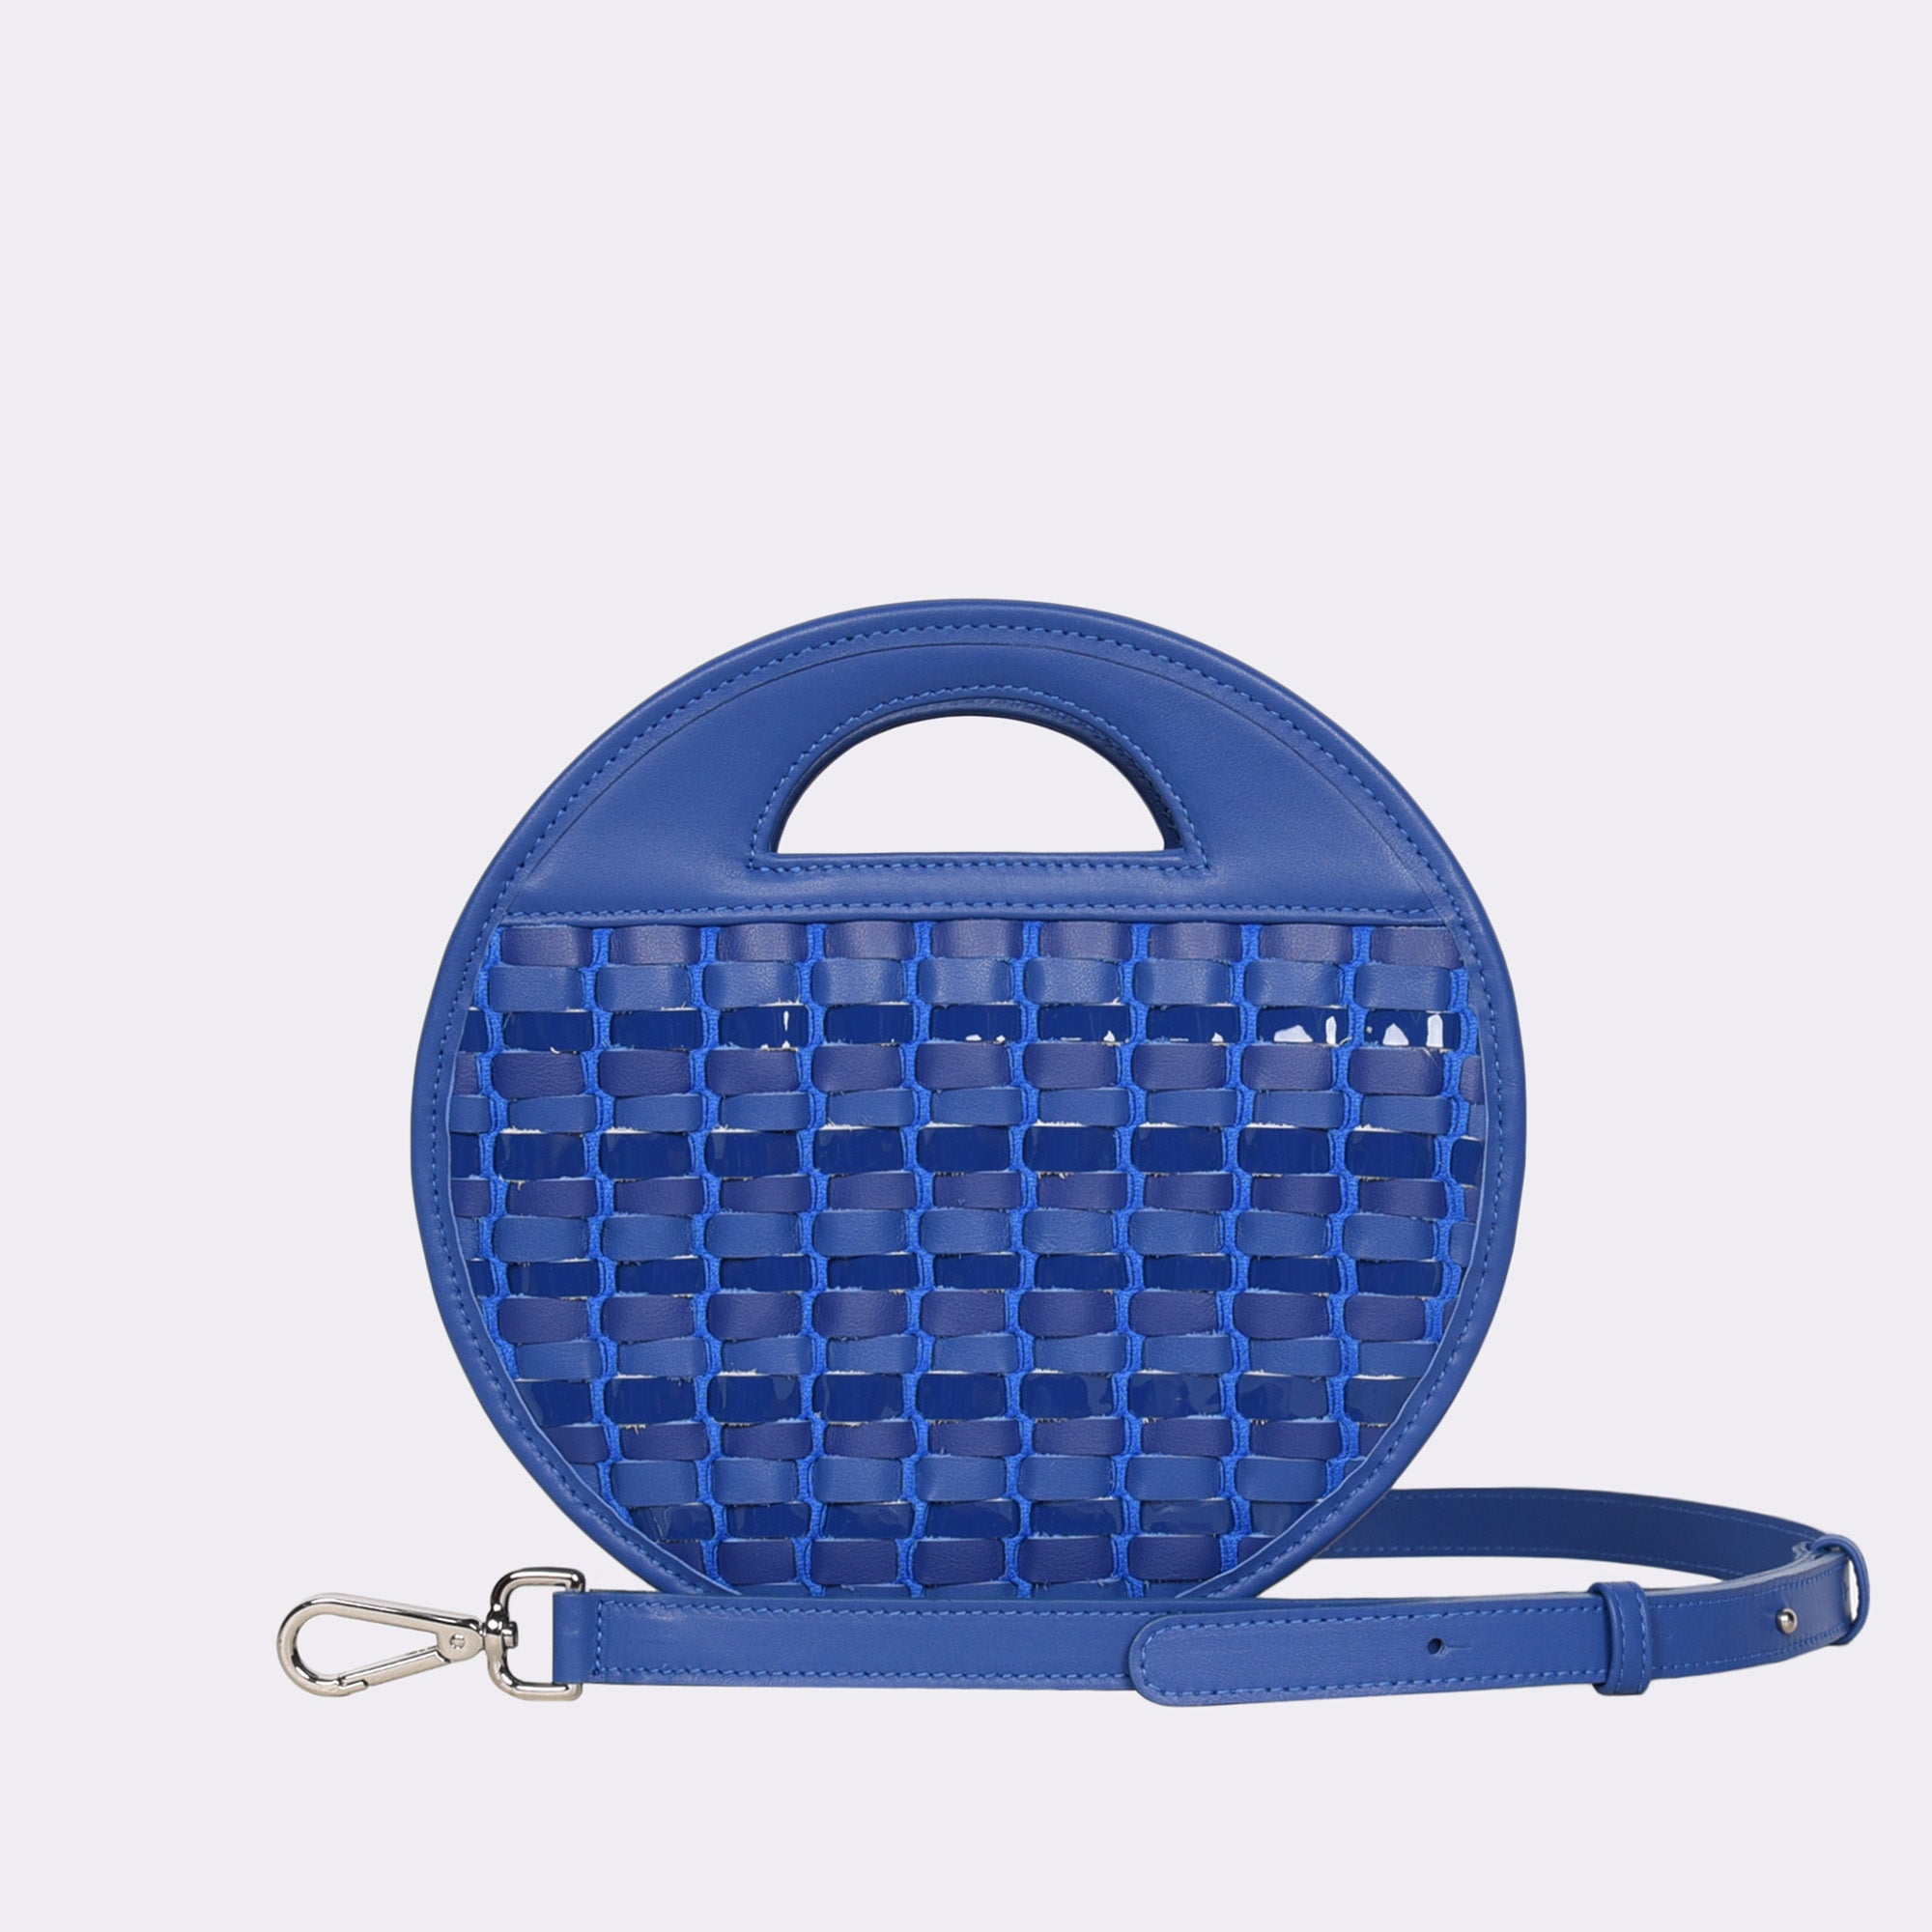 Picture of American made luxury top handle round crossbody bag with various matte and metallic blue toned handwoven leathers.